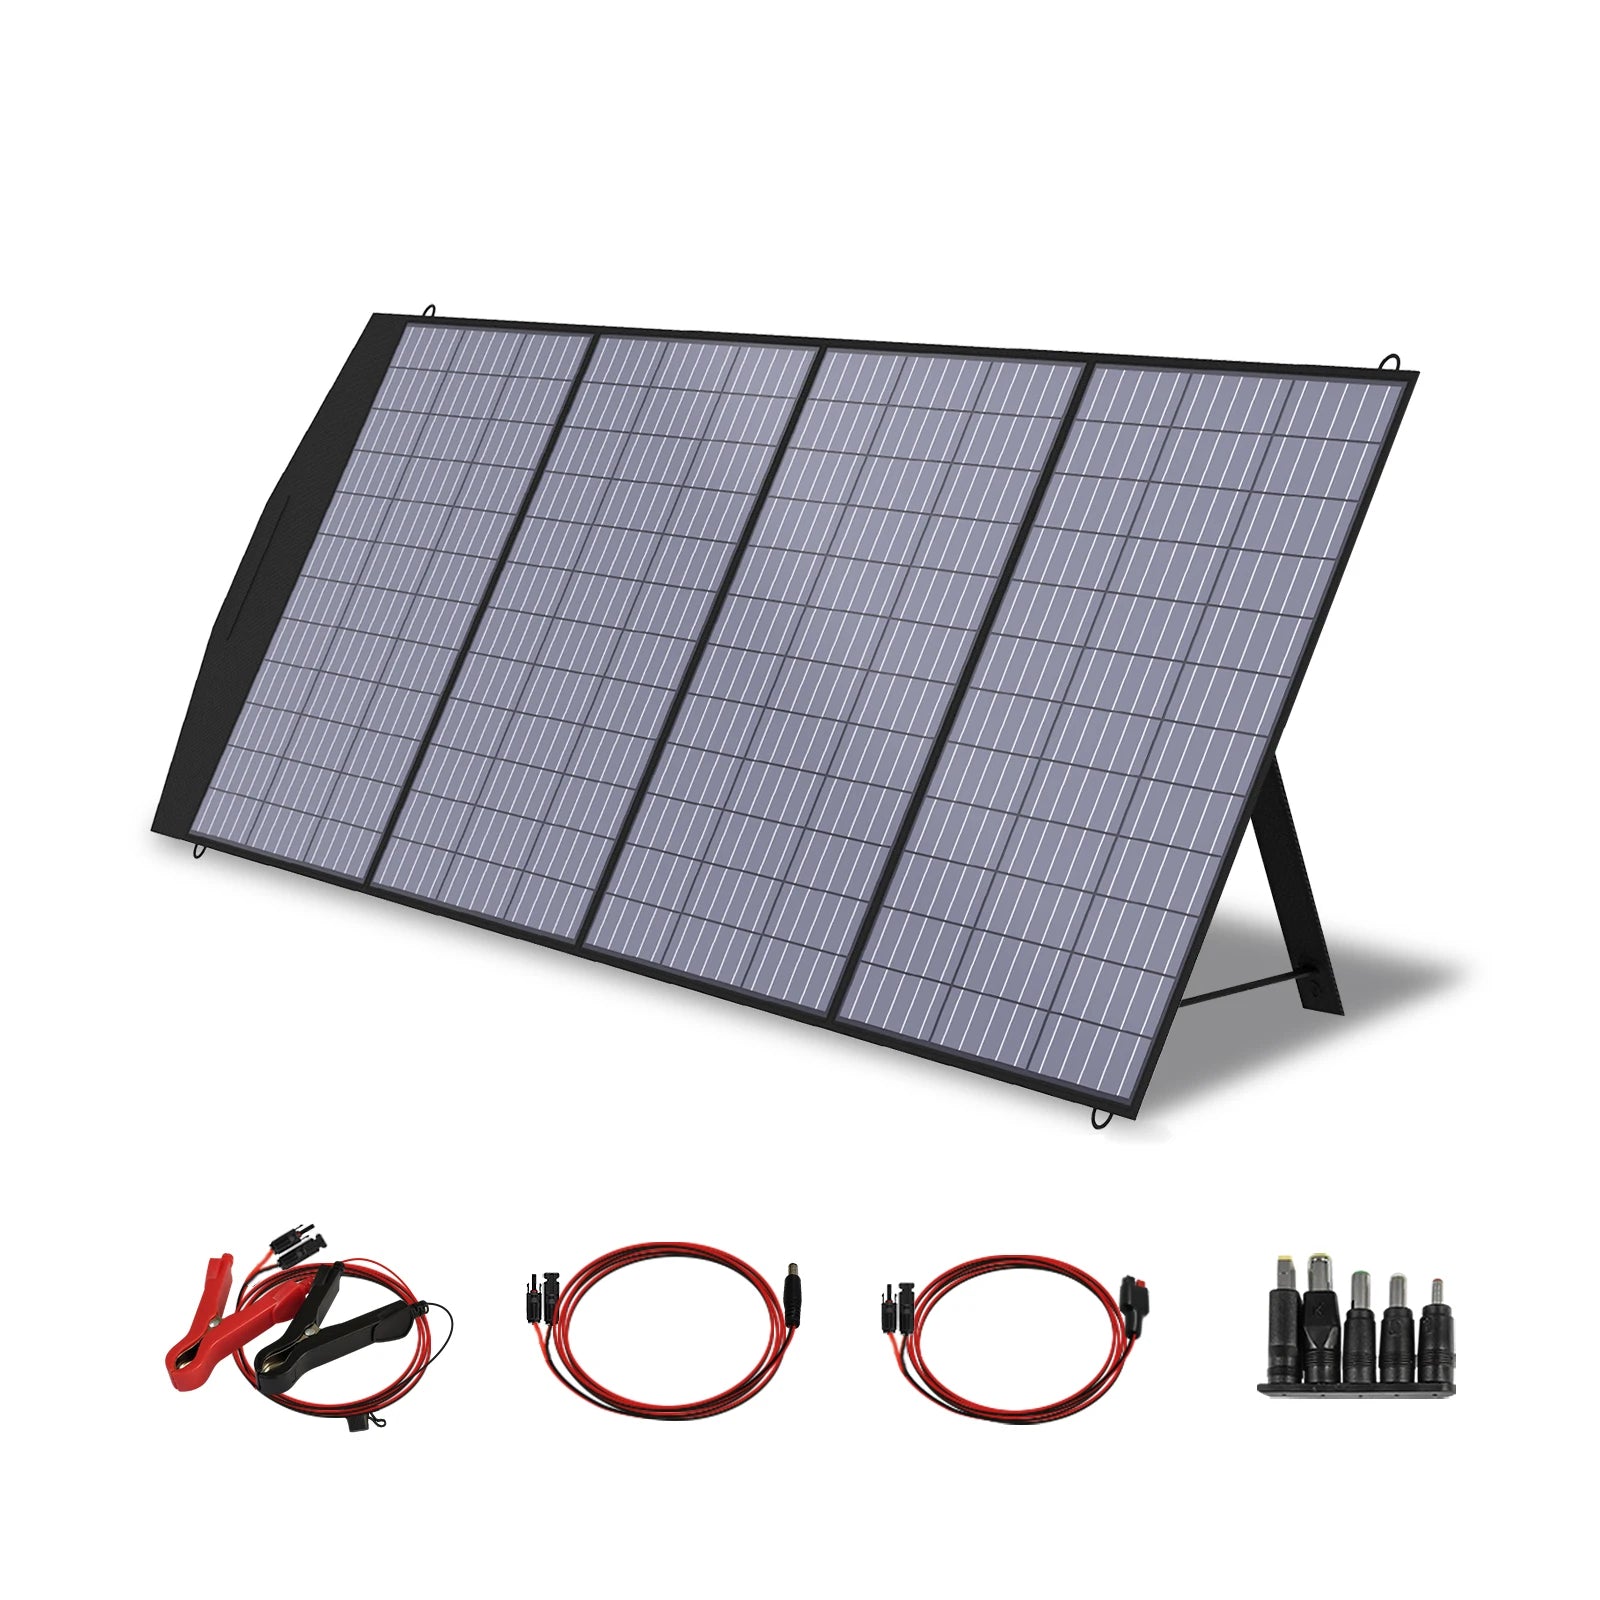 Maximum Power Point Tracking (MPPT) controller optimizes solar charging by detecting max power output.